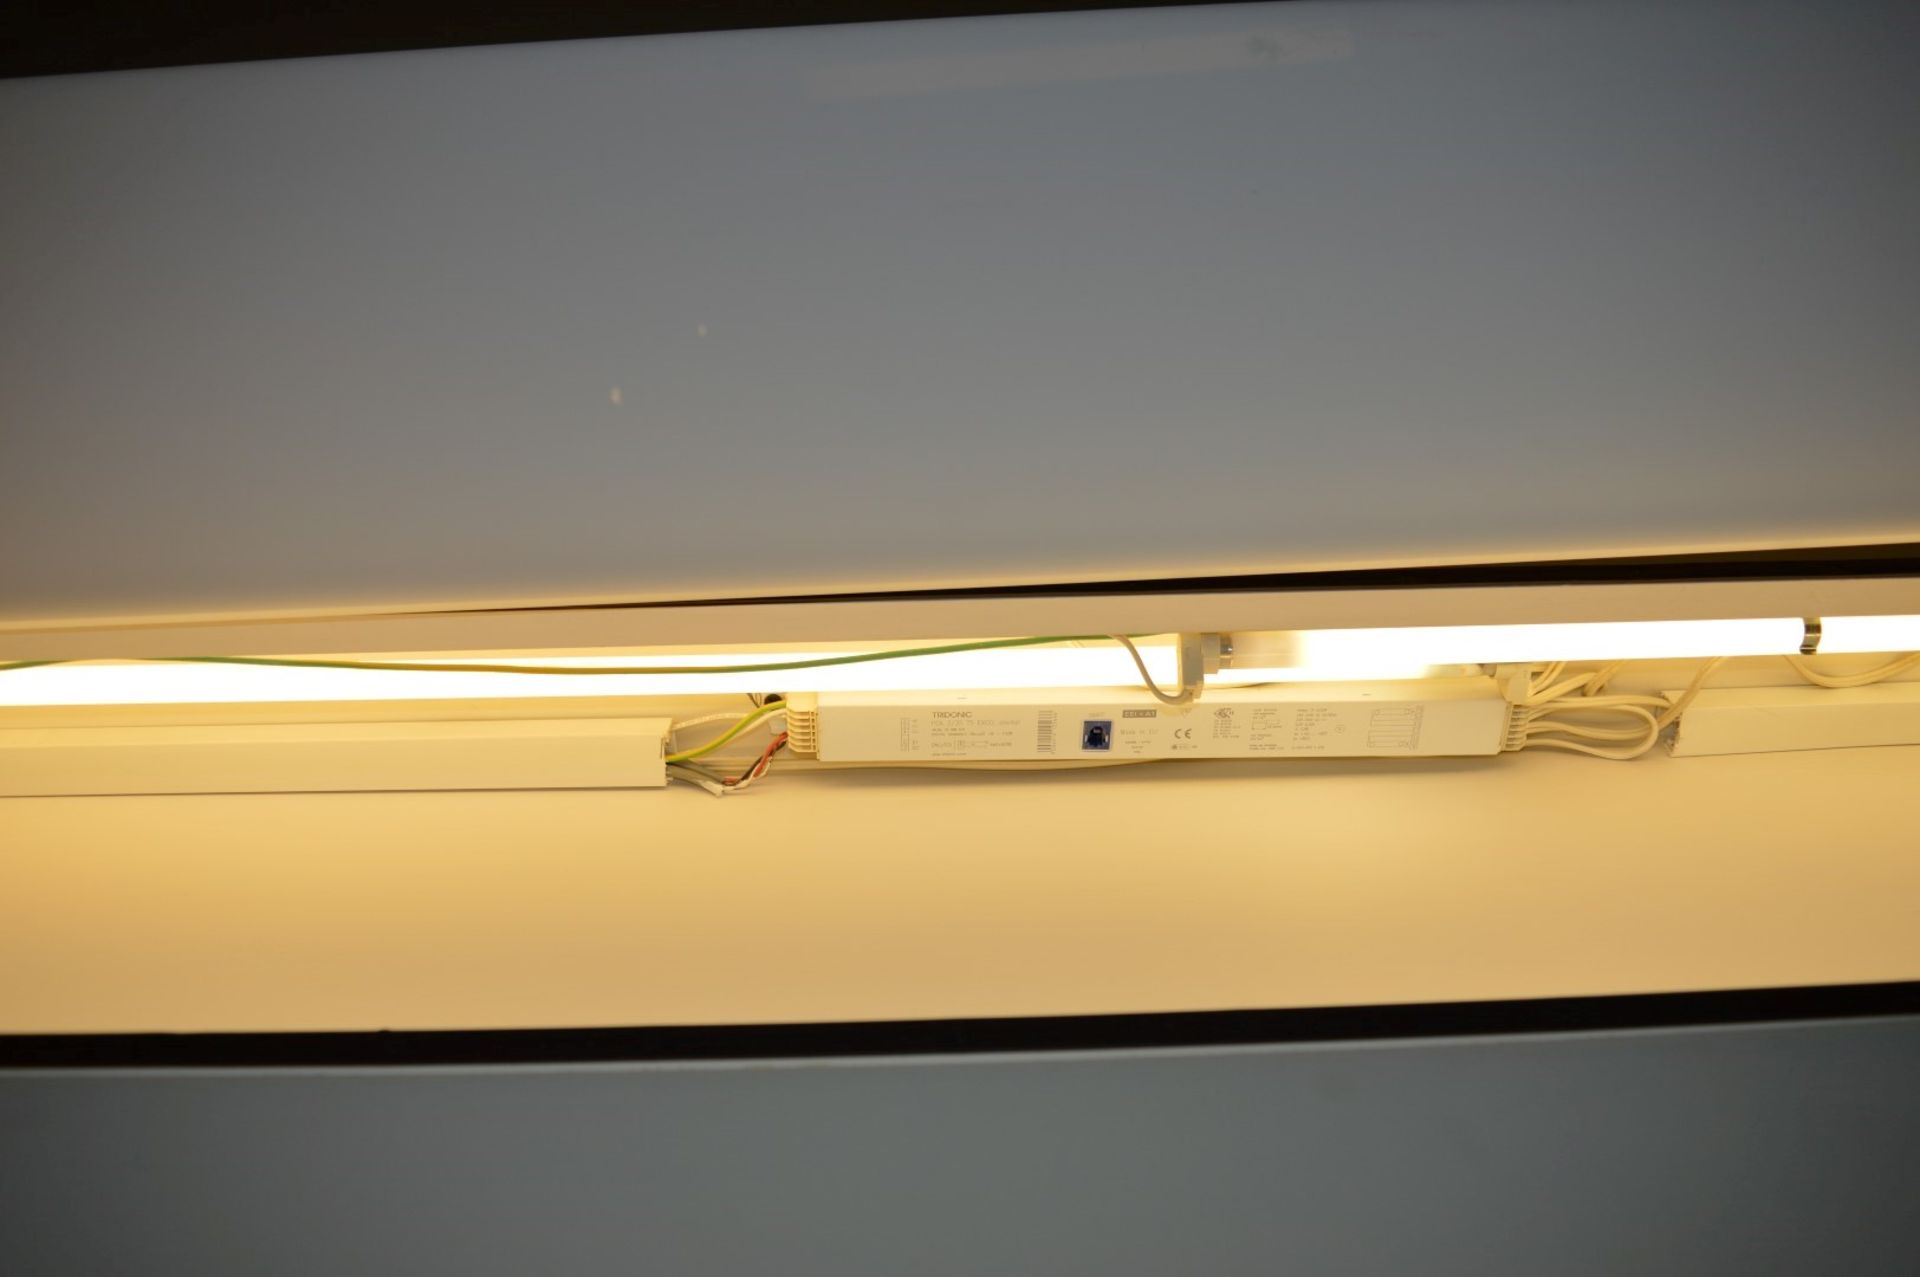 17 x Recessed Wall Light Fittings - Includes 34 x Tridonic Ballasts, Approx 68 x Tube Lights and - Image 5 of 15